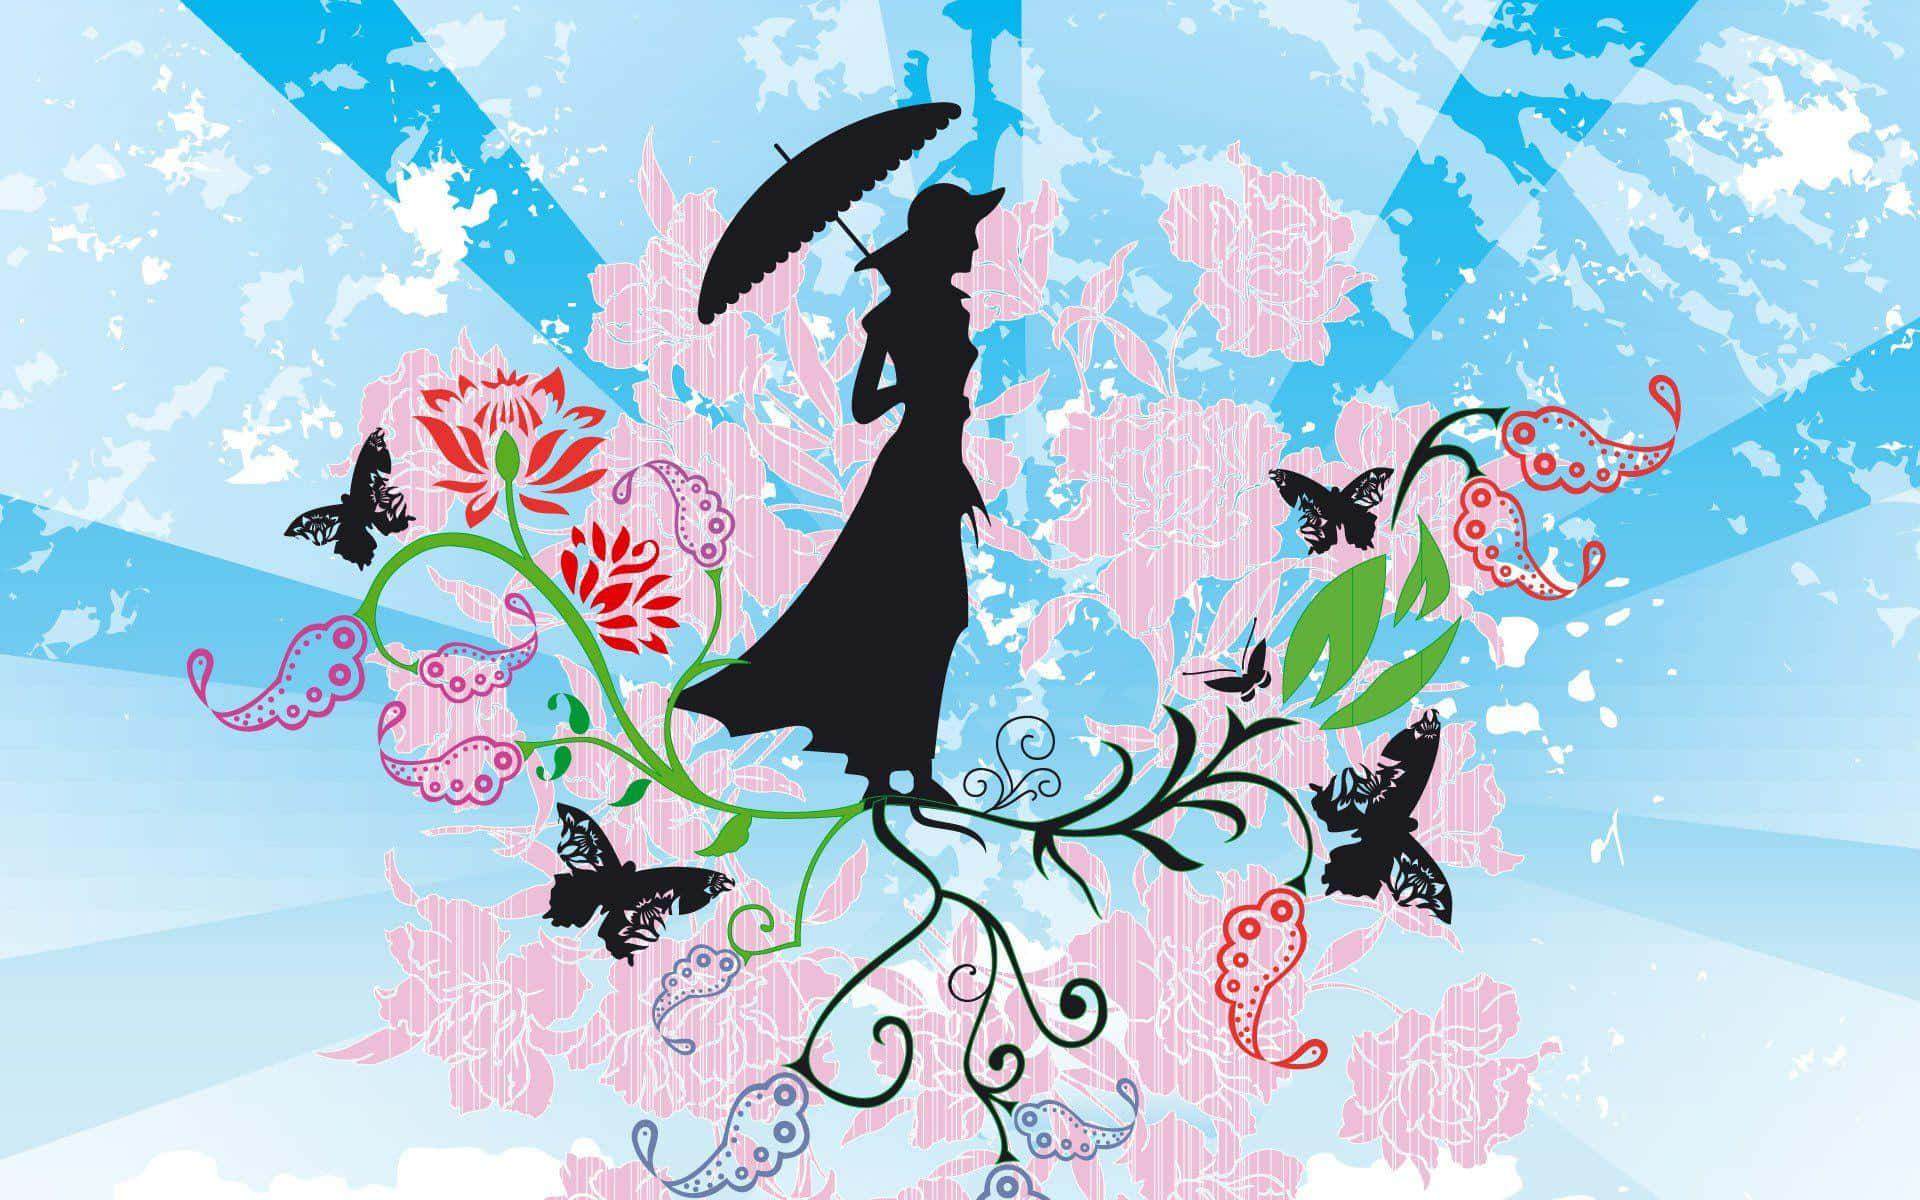 "Mary Poppins in a magical adventure" Wallpaper